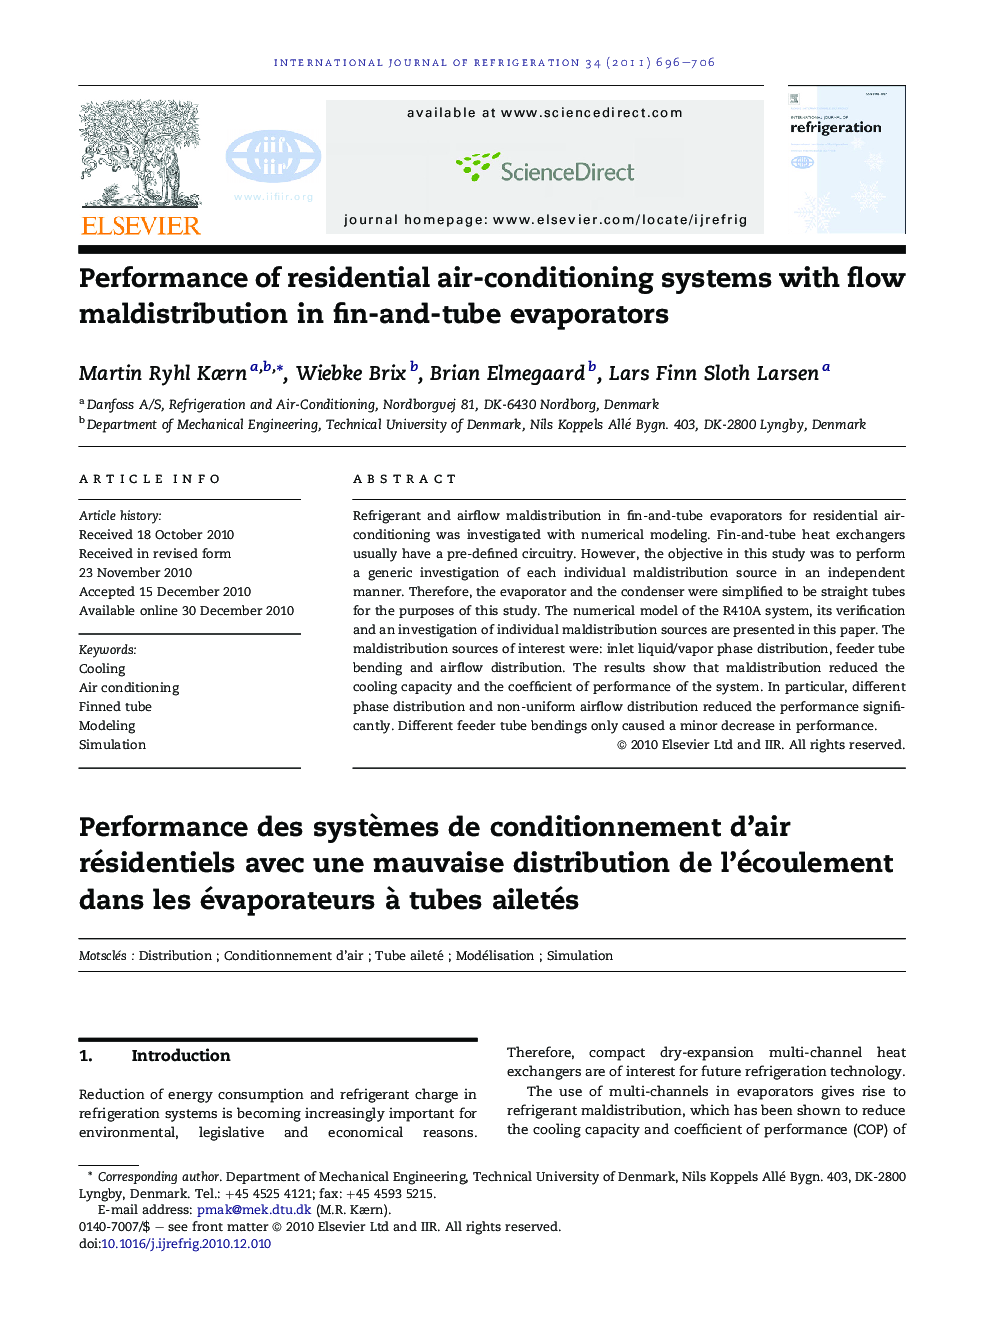 Performance of residential air-conditioning systems with flow maldistribution in fin-and-tube evaporators